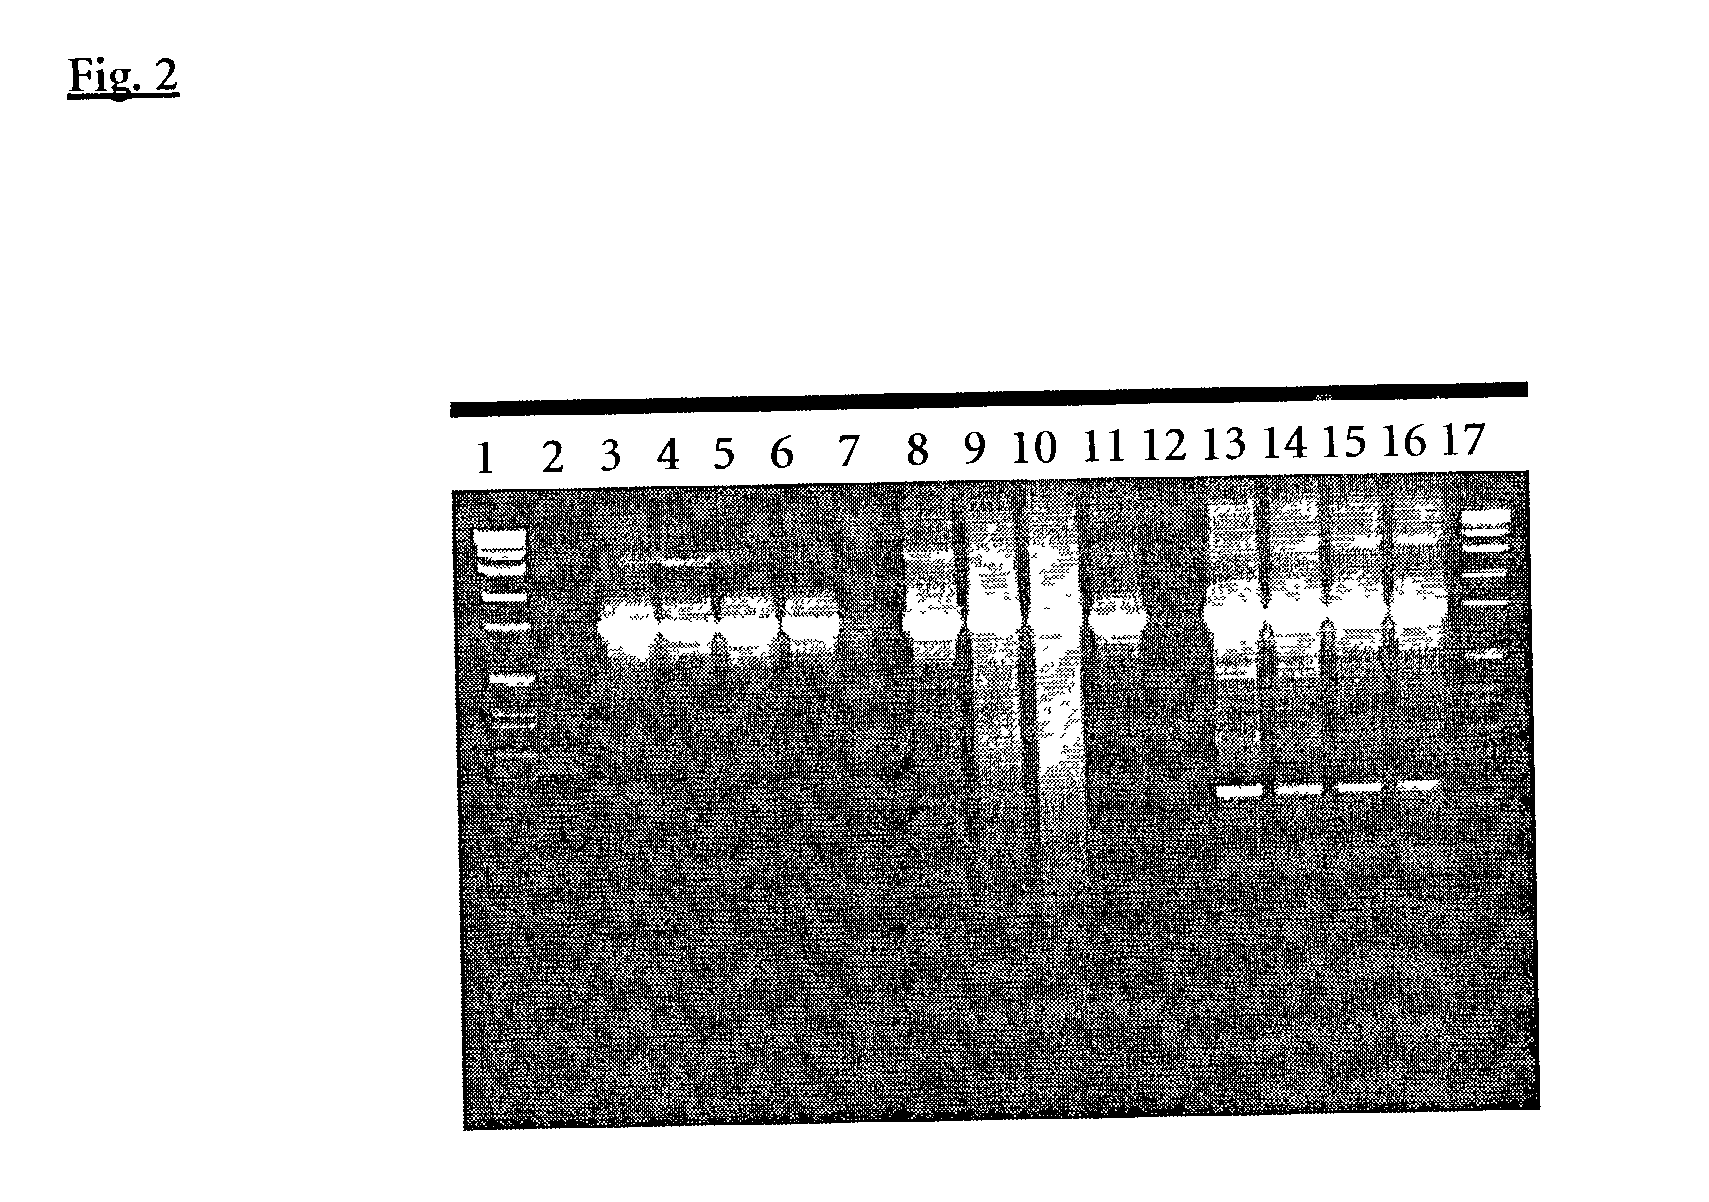 Composition and method for hot start nucleic acid amplification